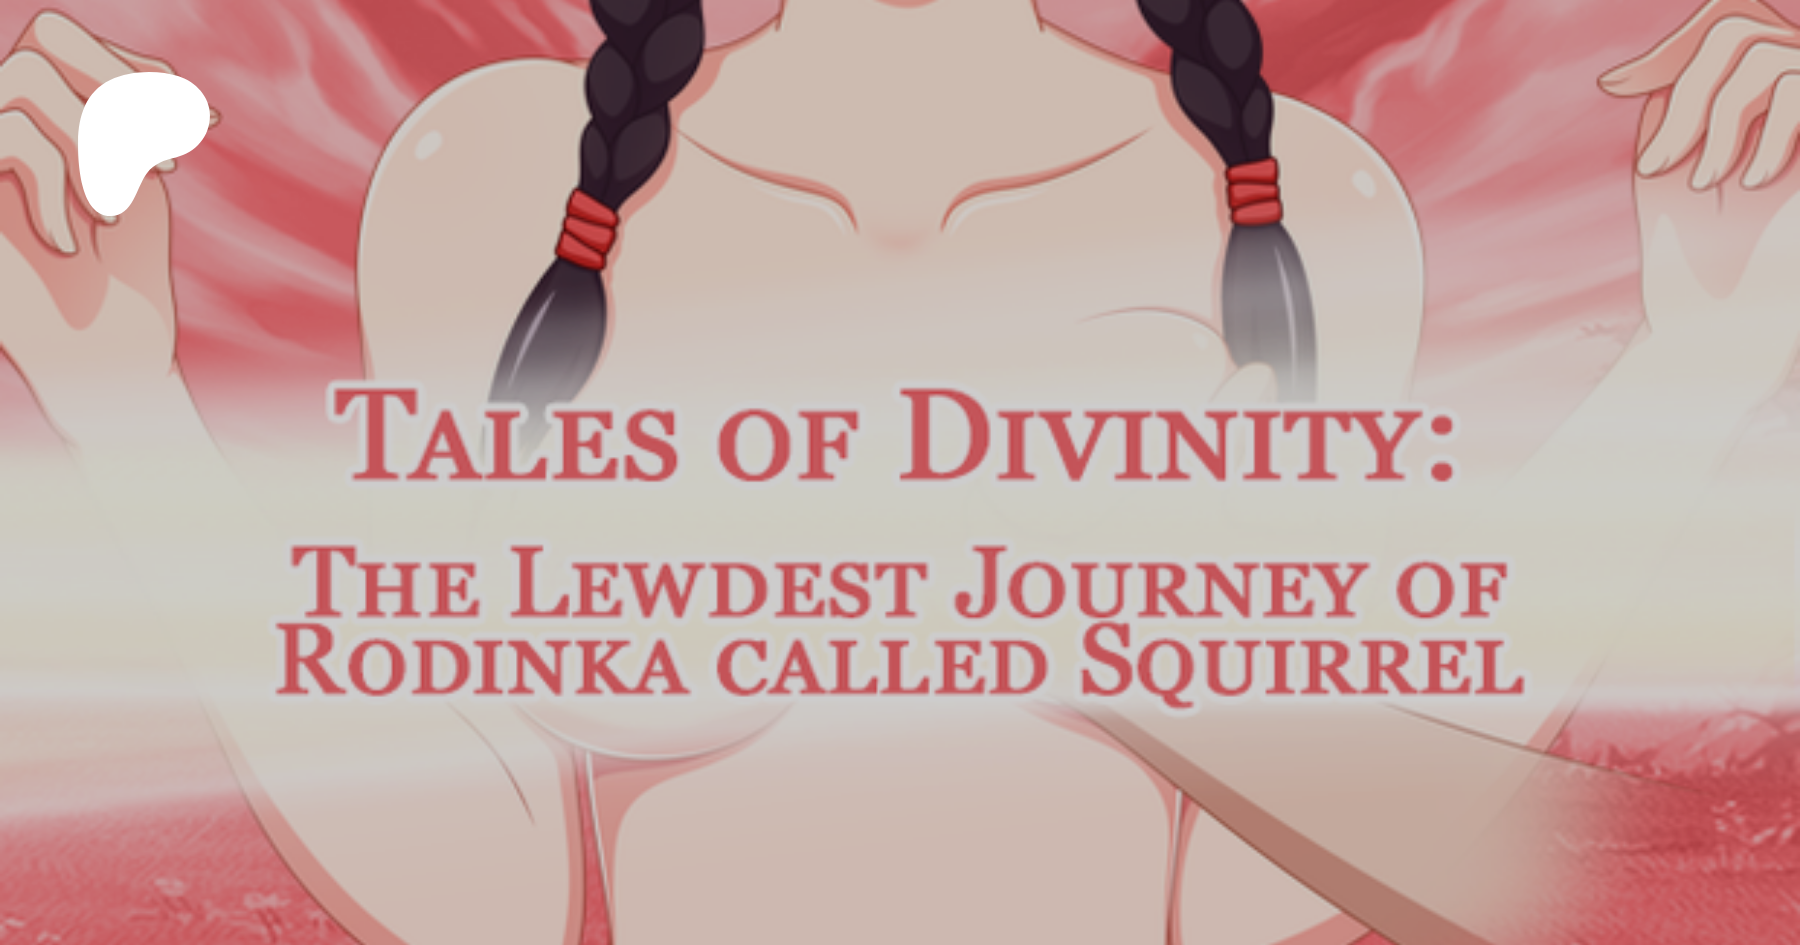 Tales of divinity: the lewdest journey of rodinka called squirrel